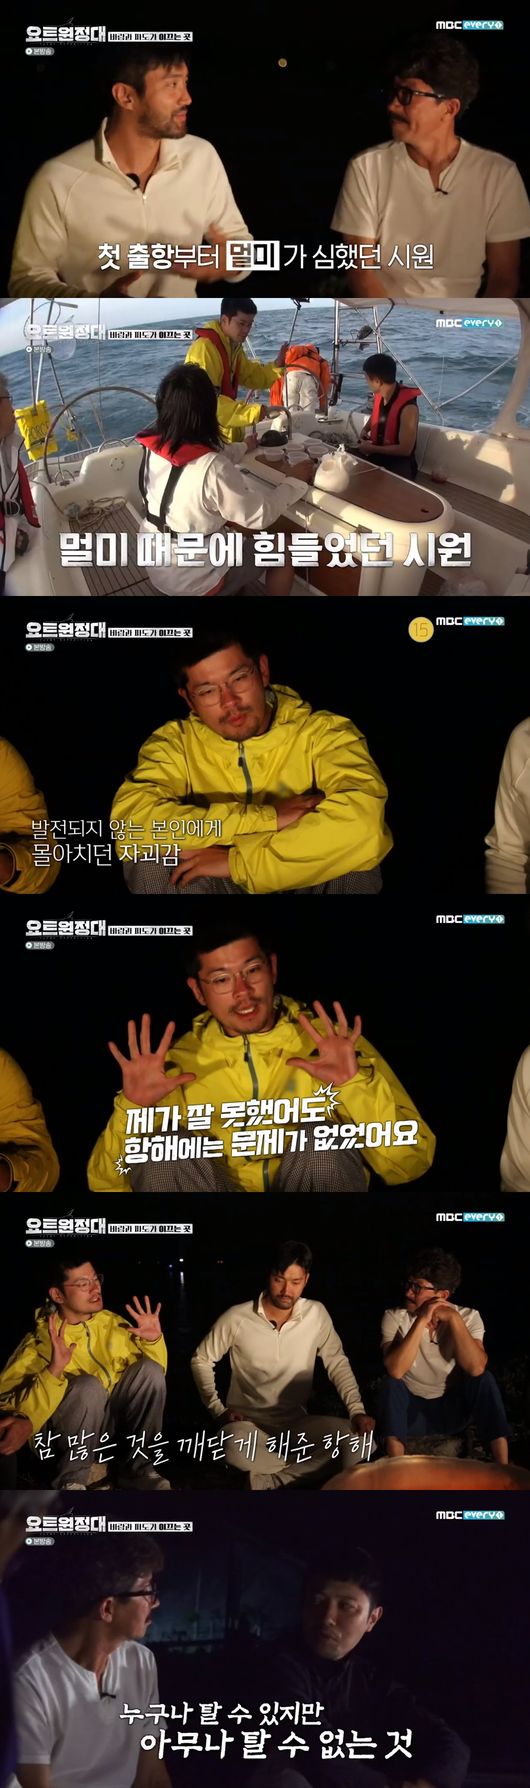 Jin Goo, Choi Siwon, Chang Kiha and Song Ho-joon finished their yacht trip and returned home.In MBC Everlon yacht Expedition broadcasted on the 19th, Jin Goo, Chang Kiha, Choi Siwon and Song Ho Joon spent the last night of the trip and bloomed the story.Earlier, Song Ho-joons birthday party was held on the same day. Captain Kim Seung-jin boiled seaweed soup for Song Ho-joons birthday and carefully prepared duck bulgogi.The crew sang a birthday party song for Song Ho-joon before the meal.Kim Seung-jin said, I made it with all the beef in it. The crew enjoyed the meal deliciously. When Choi Siwon turned it off, he suddenly got up.Choi Siwon went into the room and brought out a gift: Choi Siwon impressed by offering her a gift, saying, Its not a big deal, but happy birthday.Song Ho-joon said, The beef seaweed soup and duck bulgogi were the first celebrations. I had an unforgettable birthday.I think I have changed my mind how to live. The men were on the road to the next, and the men moved to the rubber boat to get inside the property, which they admired in the clear waters that were clear enough to see the floor.The crews gathered on the bonfire and sat together for the final night; Kim Seung-jin asked, How are the differences before and after the yacht trip?The first day was really sick, its still memorable - it was really hard, Choi Siwon said.Chang Kiha said: I am so sorry to the captain, but frankly, I do not have Feelings who have become close to yacht. I still do not know how to operate yacht.I thought I was the only one. Chang Kiha said, I reaffirmed that I am a very short person.I thought that this shortage could be lived without difficulty if I lived with others. On the other hand, I am fortunate.Jin Goo said, I think everyone can ride, but I can not ride anyone.Song Ho-joon said, The key to this trip is that we were worried about each other and relied on each other. Kim Seung-jin said, The first and the end of the voyage are the most important.We will sail tomorrow, but lets make it safe. Meanwhile, the expedition crew returned to Geoje Island safely. Chang Kiha showed tears as the ship docked.Its the second Army-like Feelings to live, Jin Goo said in an interview with the production team. For a man, Army does not want to go back, but its a place to go once.Anyone can dream, but not everyone can, Choi Siwon said.Chang Kiha said, I think I will forget all the hard things after a while, and I am caught up in the ominous sense that I will challenge again after time.: MBC Everlon yacht Expedition broadcast capture